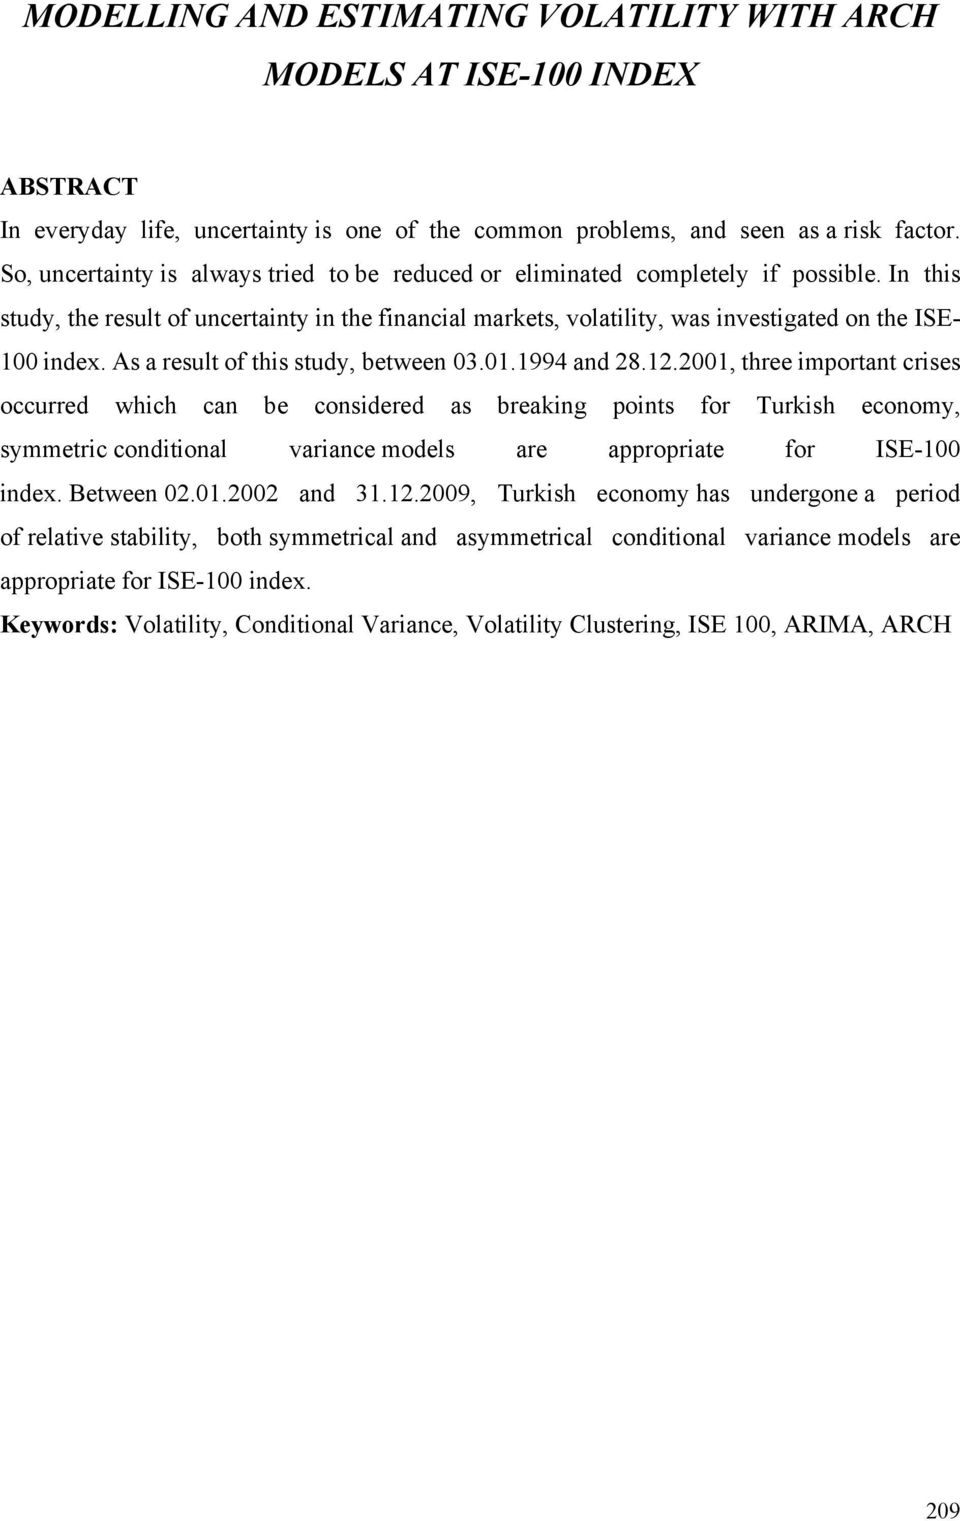 In this study, the result of uncertainty in the financial markets, volatility, was investigated on the ISE- 100 index. As a result of this study, between 03.01.1994 and 28.12.